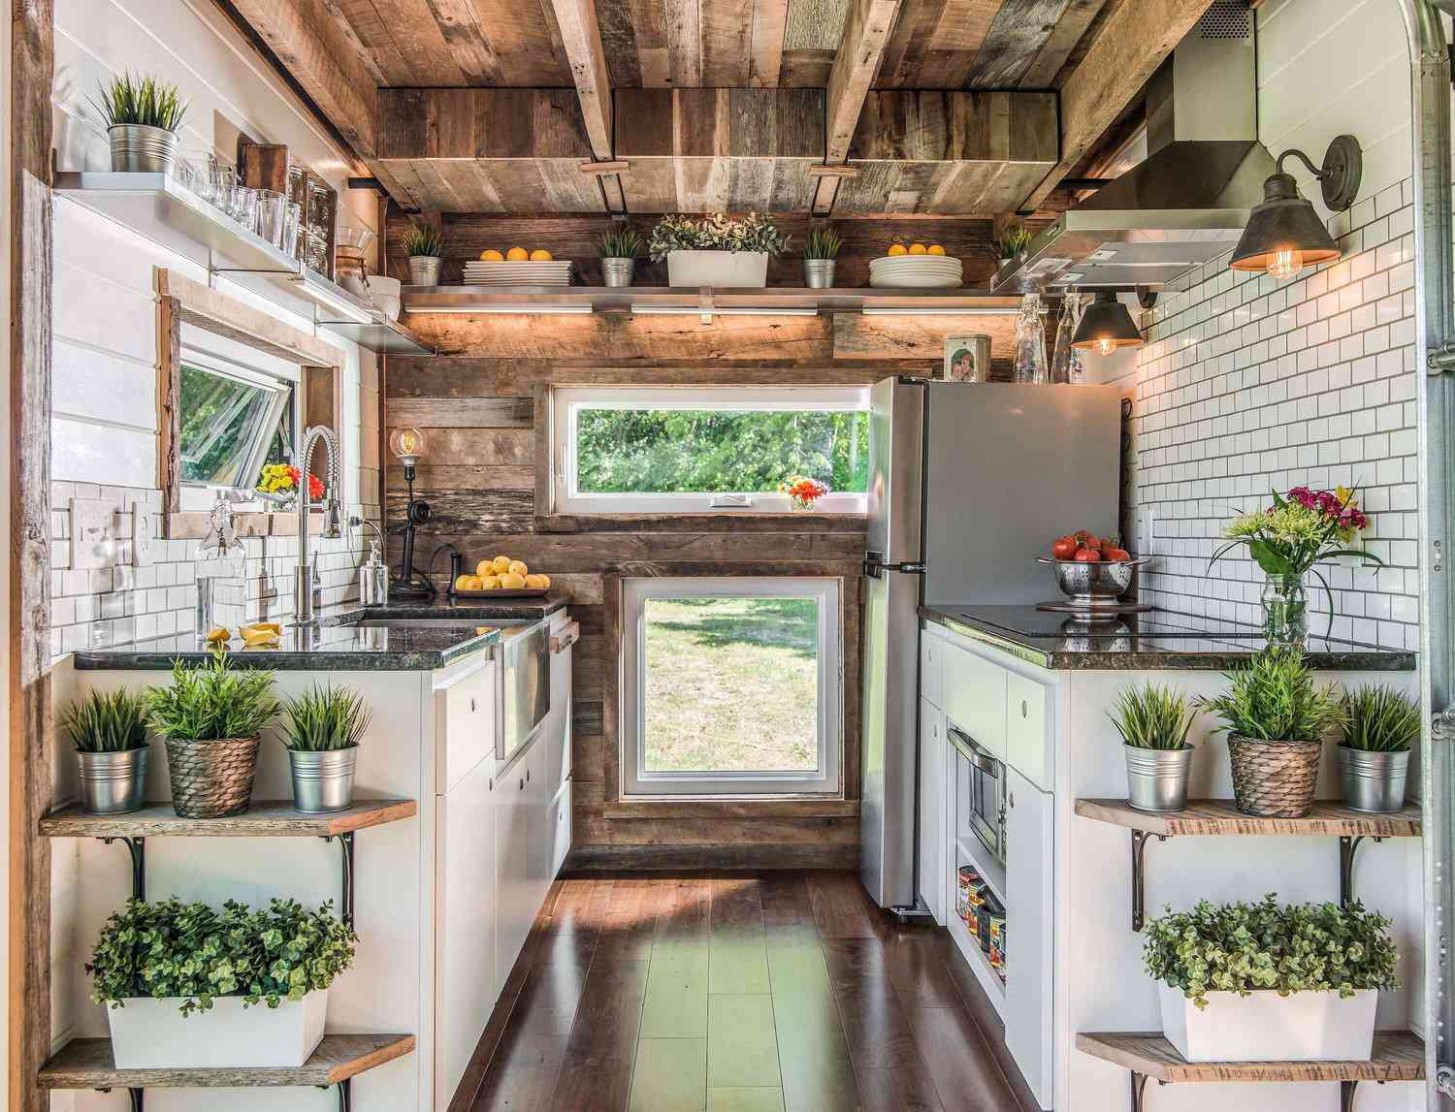 5 Tiny Home Kitchens to Inspire You